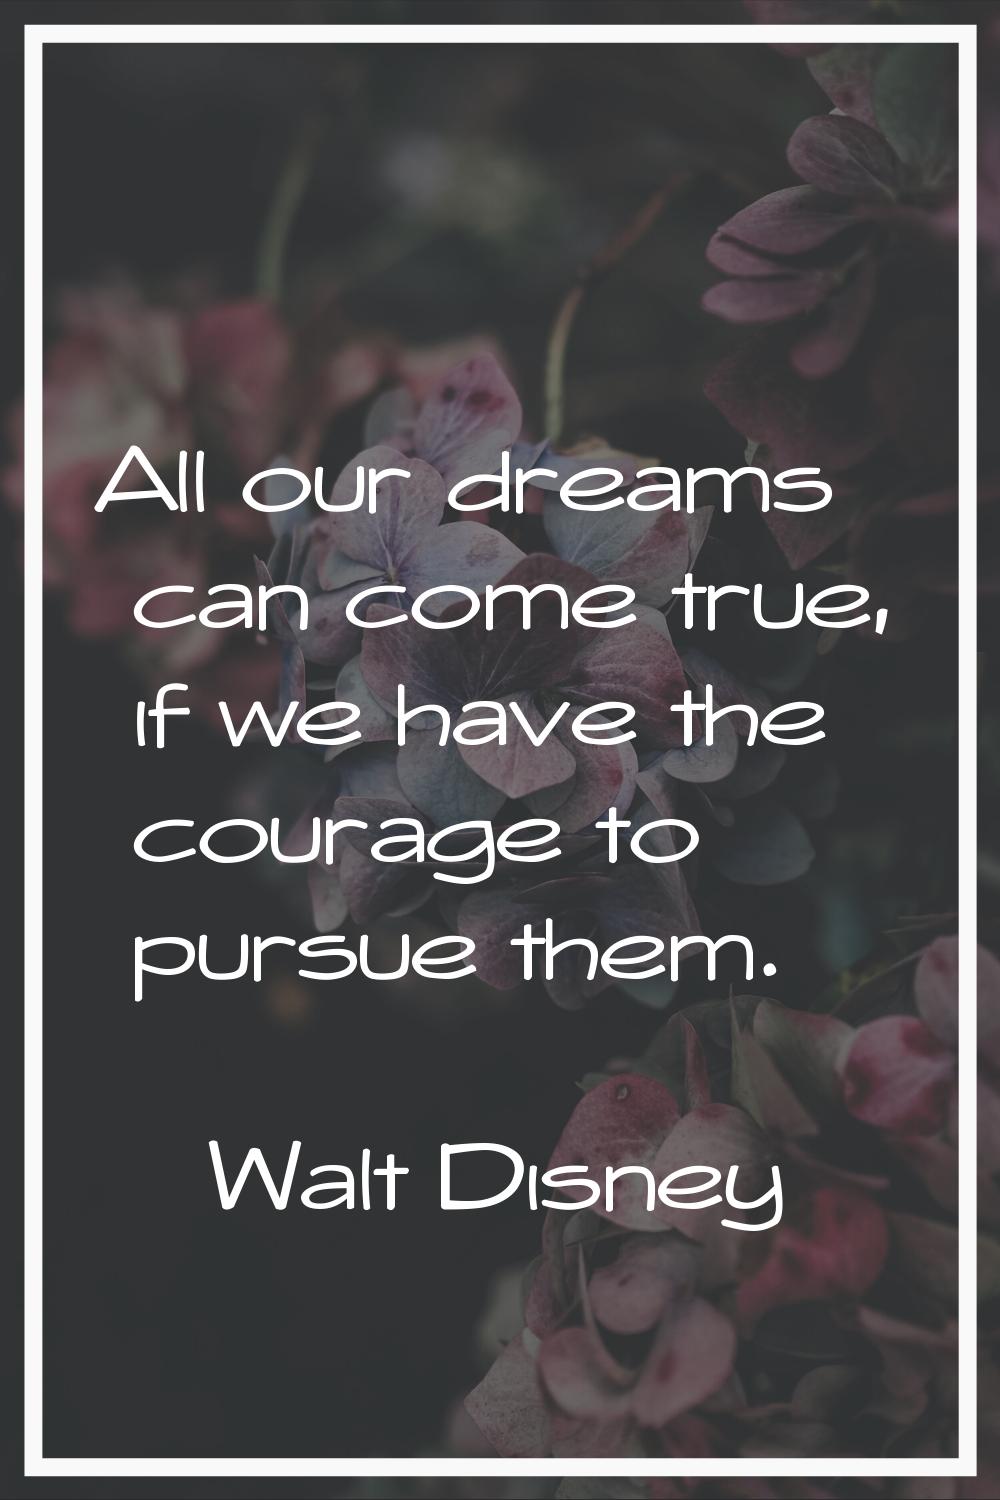 All our dreams can come true, if we have the courage to pursue them.